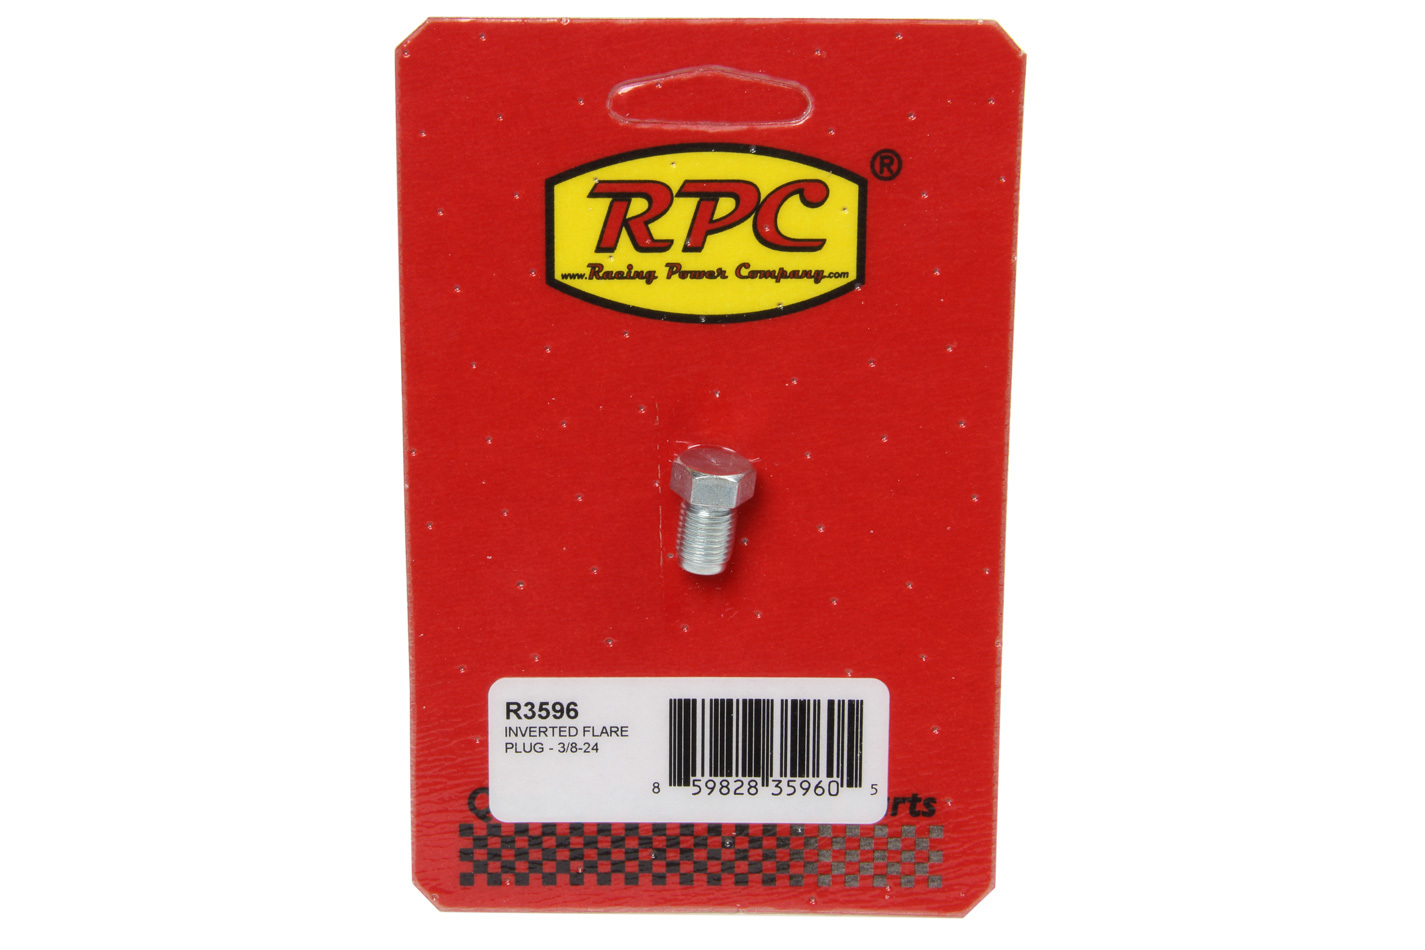 Racing Power Company R3596 Fitting, Plug, 3/8-24 in Inverted Flare Male, Hex Head, Steel, Zinc Oxide, Each